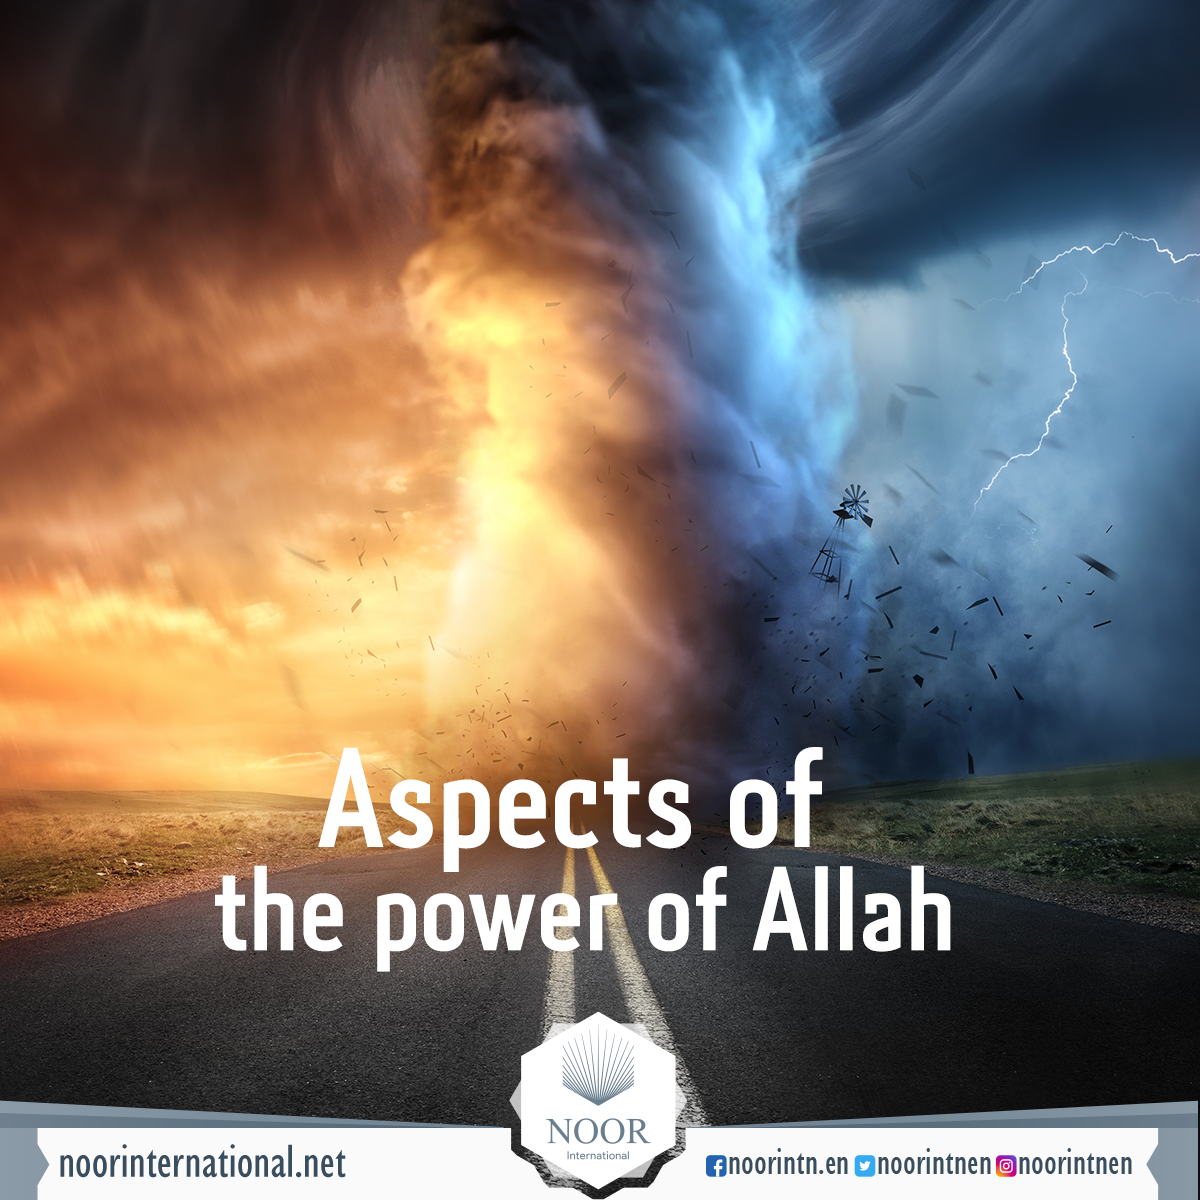 Aspects of the power of Allah